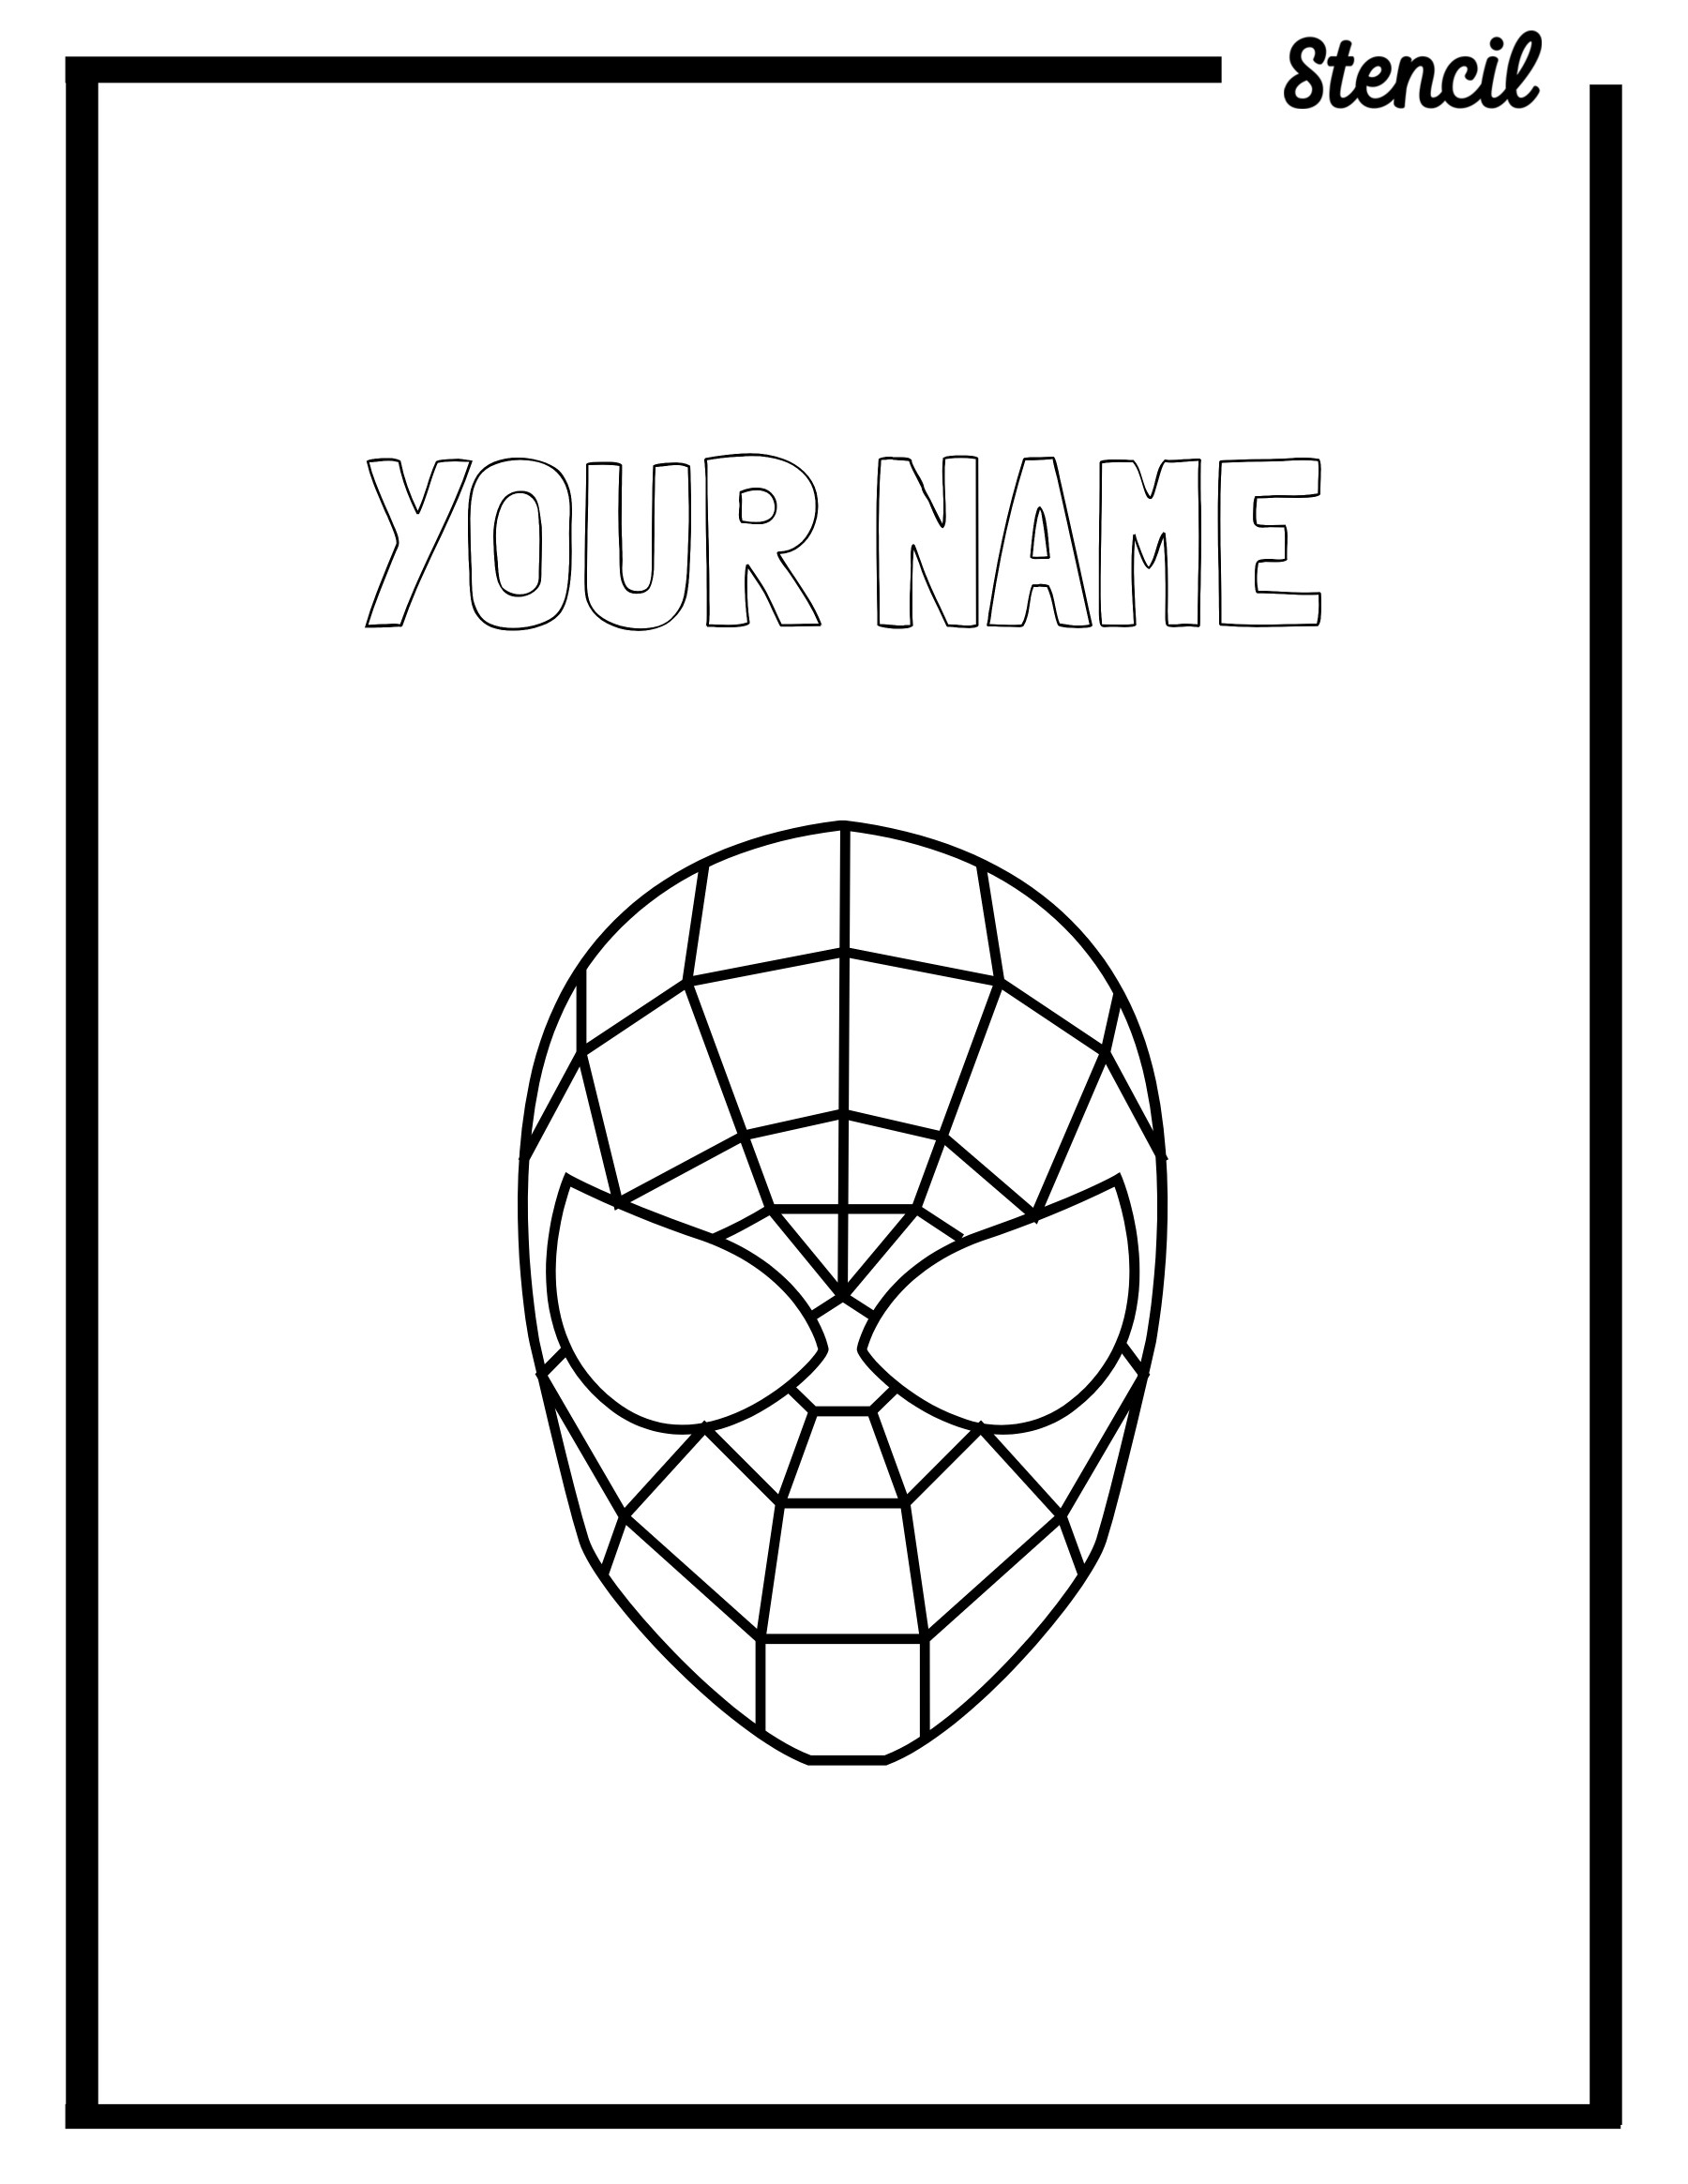 spider-man-outline-19-876-101-likes-2-803-talking-about-this-utara-wallpaper